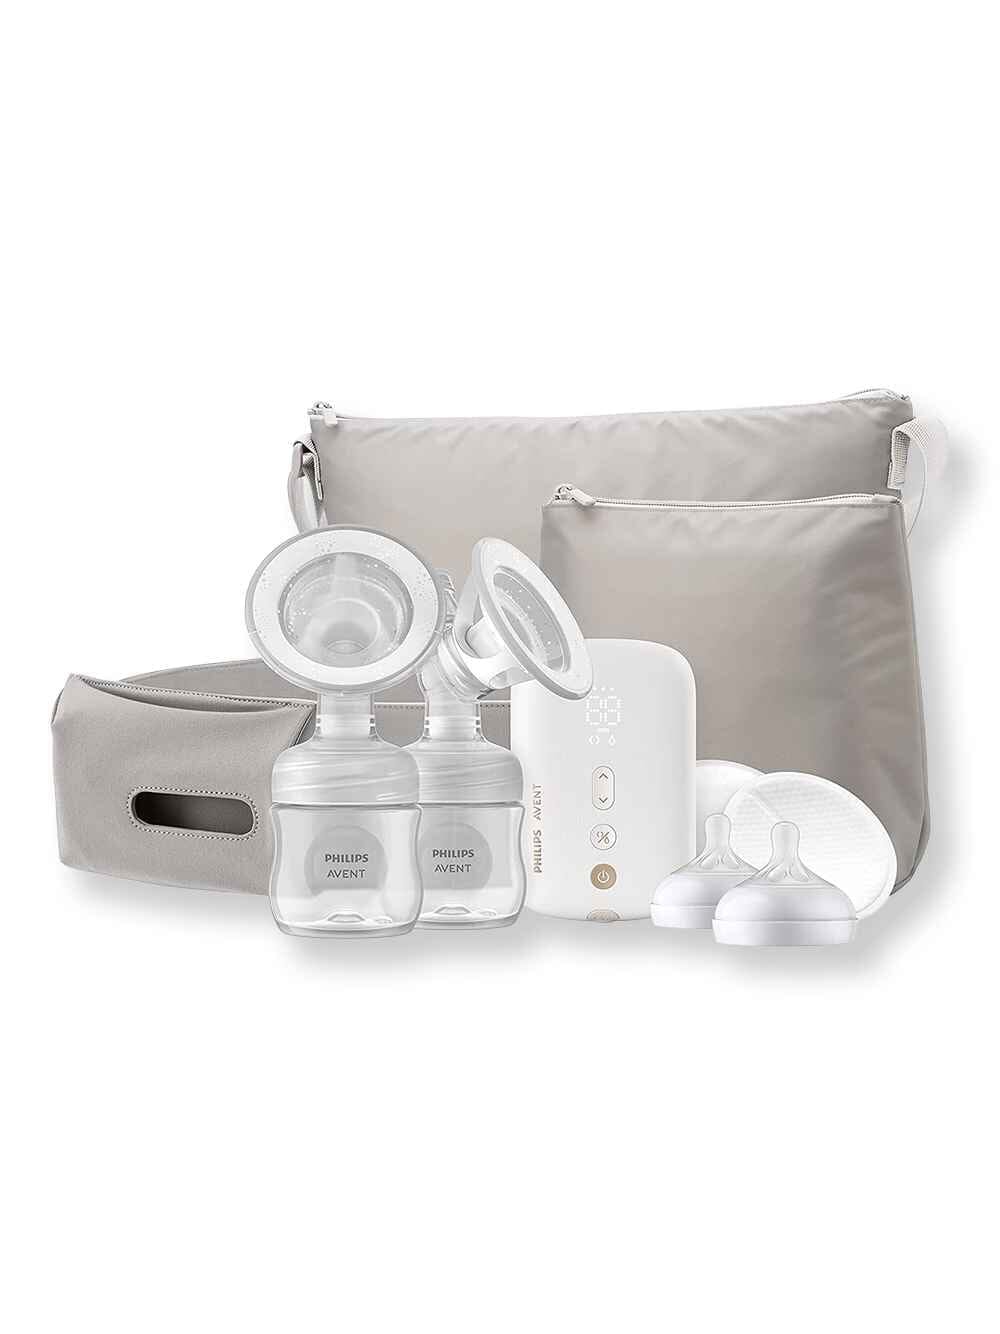 Philips Avent Philips Avent Double Electric Breast Pump Advanced With Natural Motion Technology Breast Pumps 